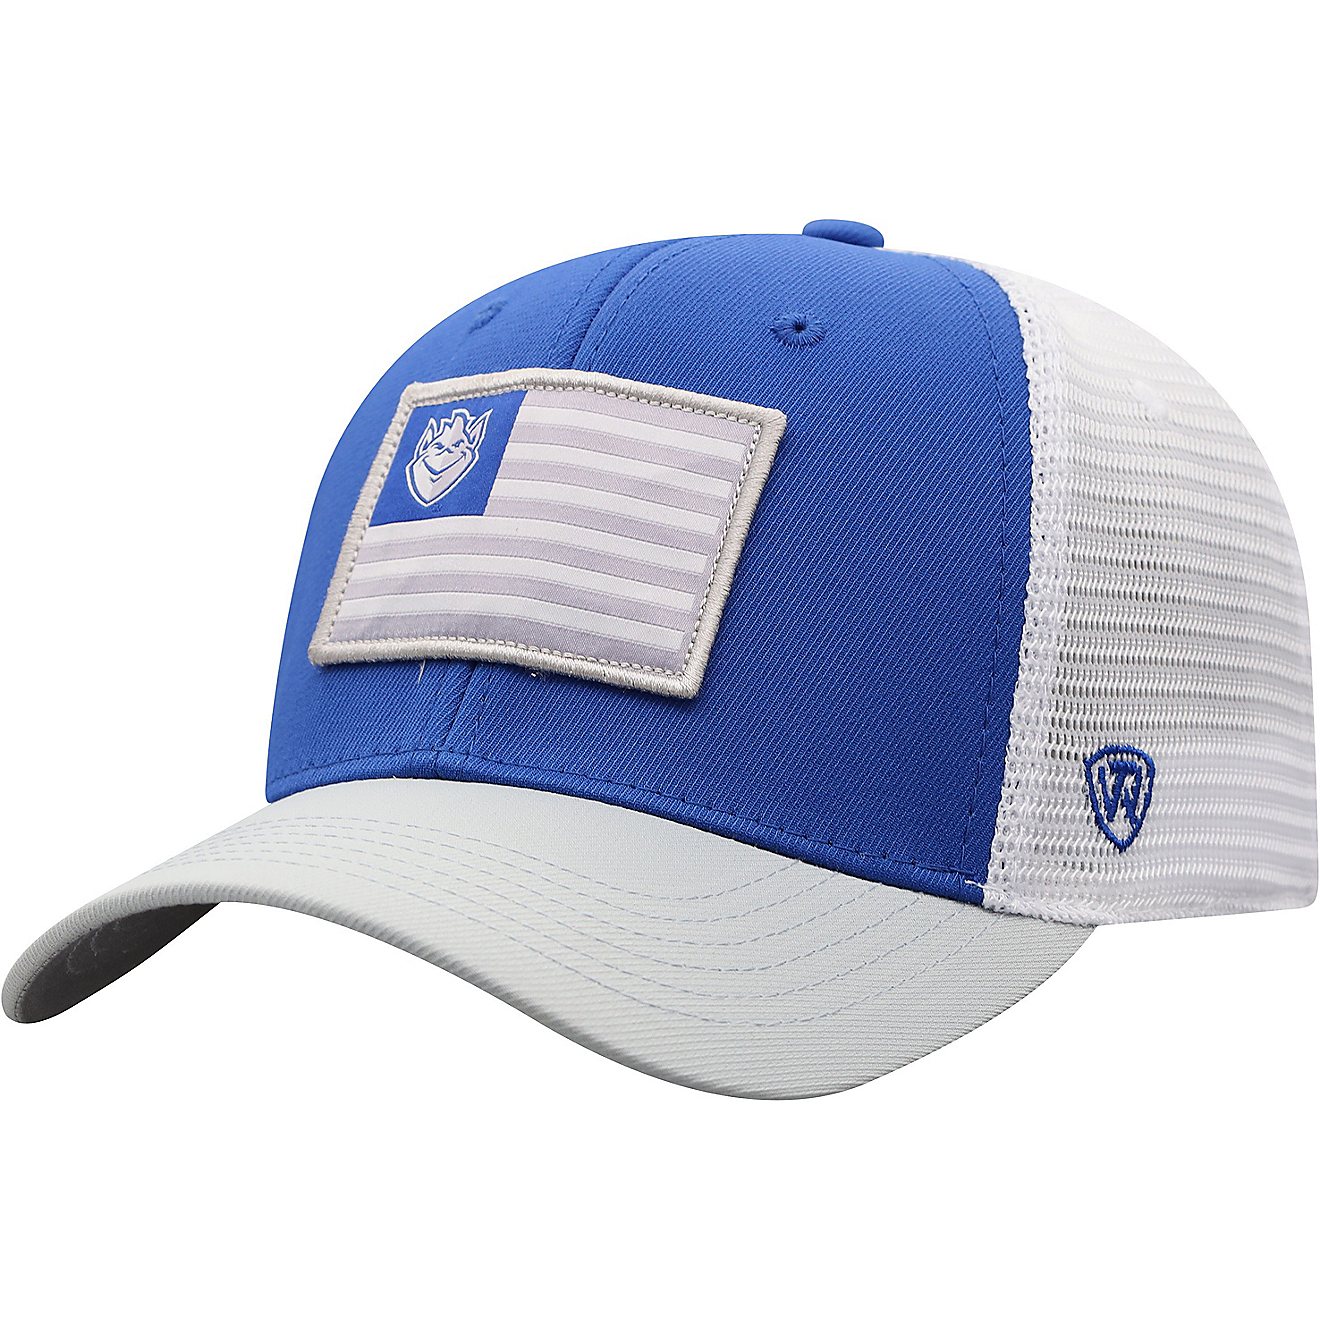 Top of the World Men's Saint Louis University Pedigree One Fit Cap                                                               - view number 3